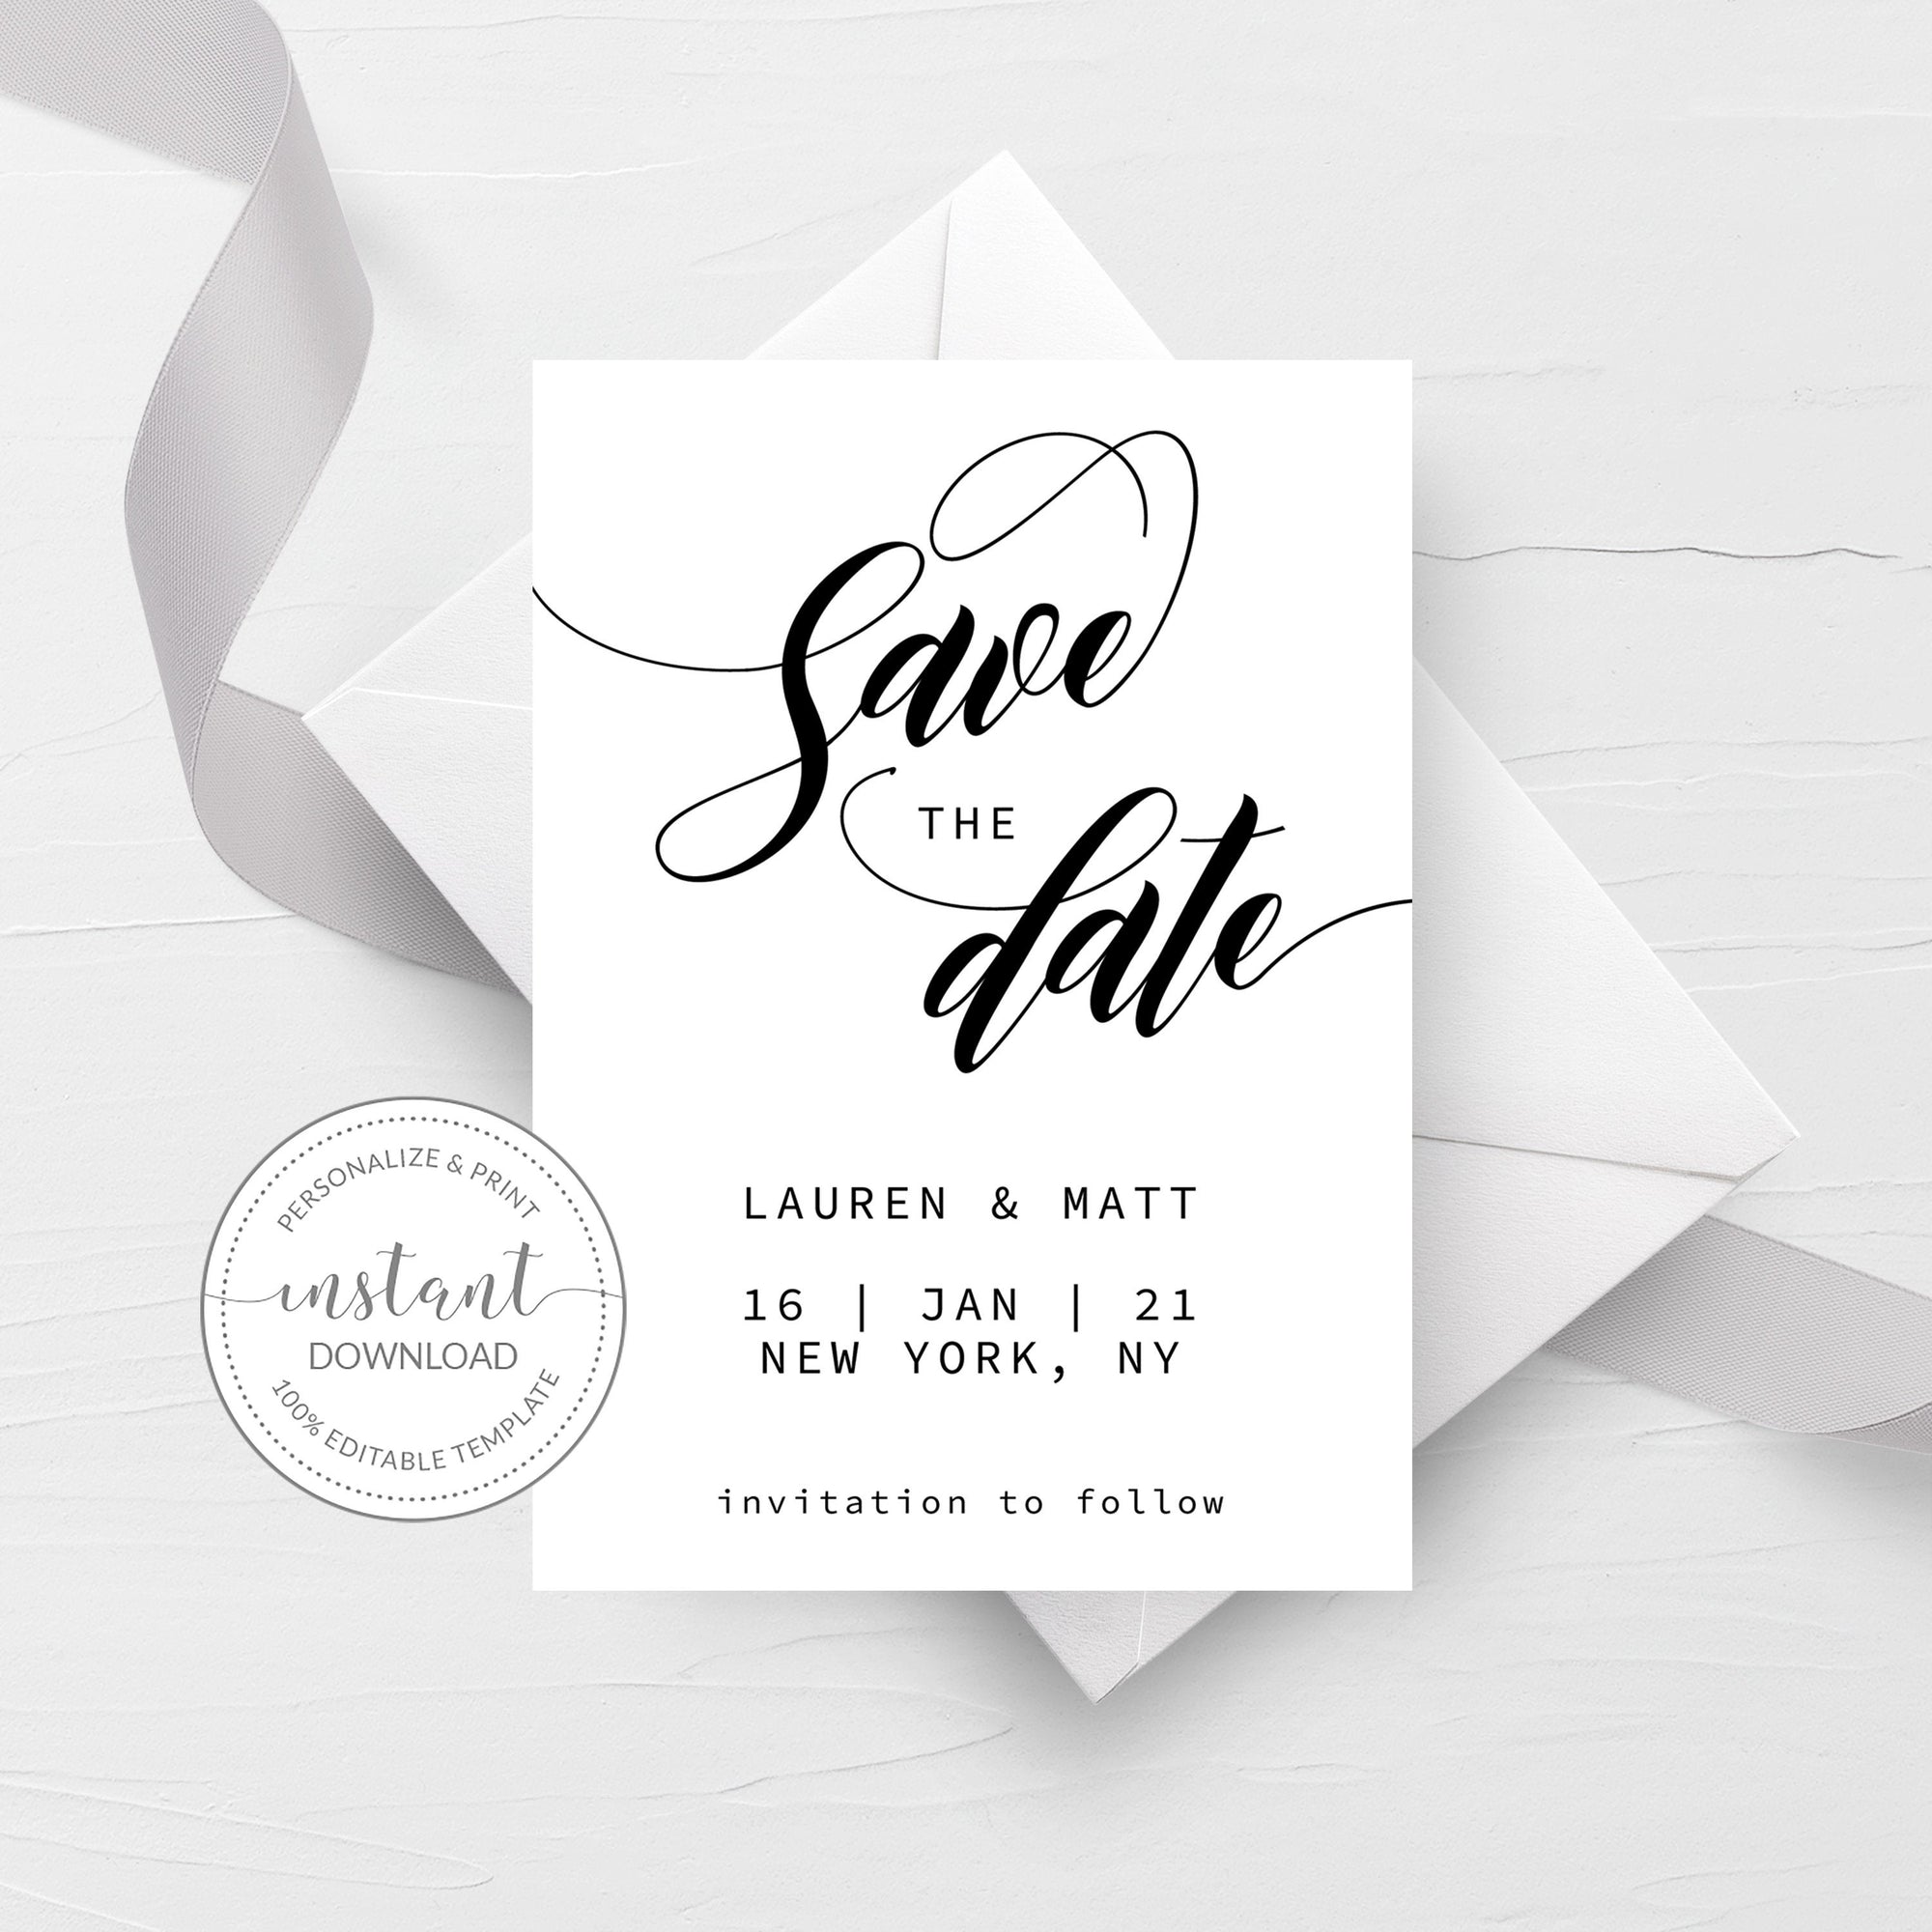 Black and White Save The Date Template, Editable Save The Date Card, Minimalist Save The Date, 5x7 - SFB100 - @PlumPolkaDot 